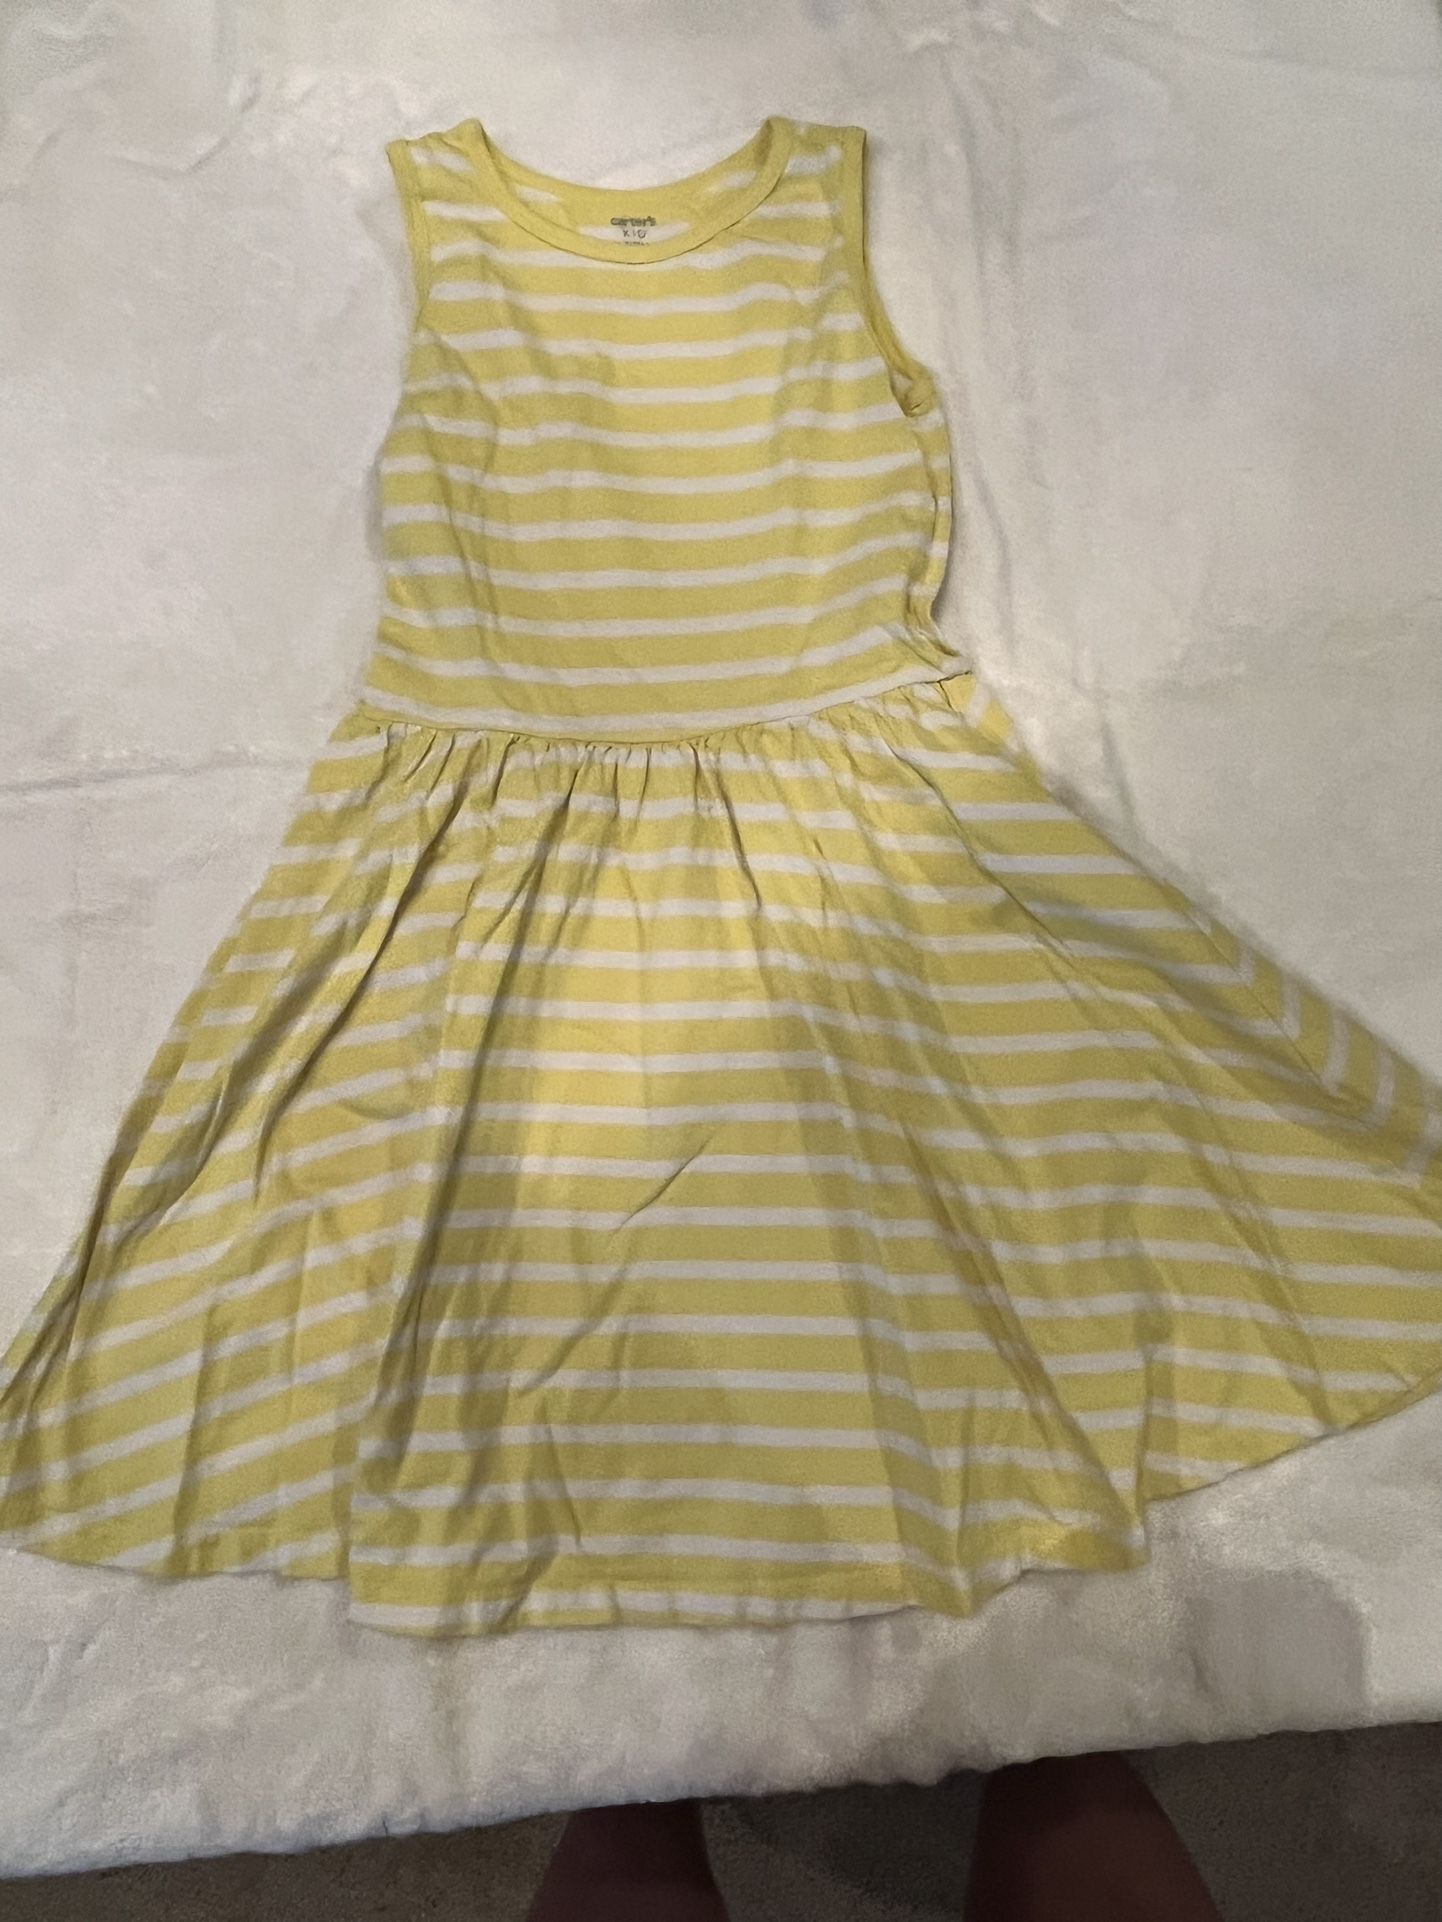 Little Girls Size 8 Carter’s Yellow & White Striped Dress With Full Shirt